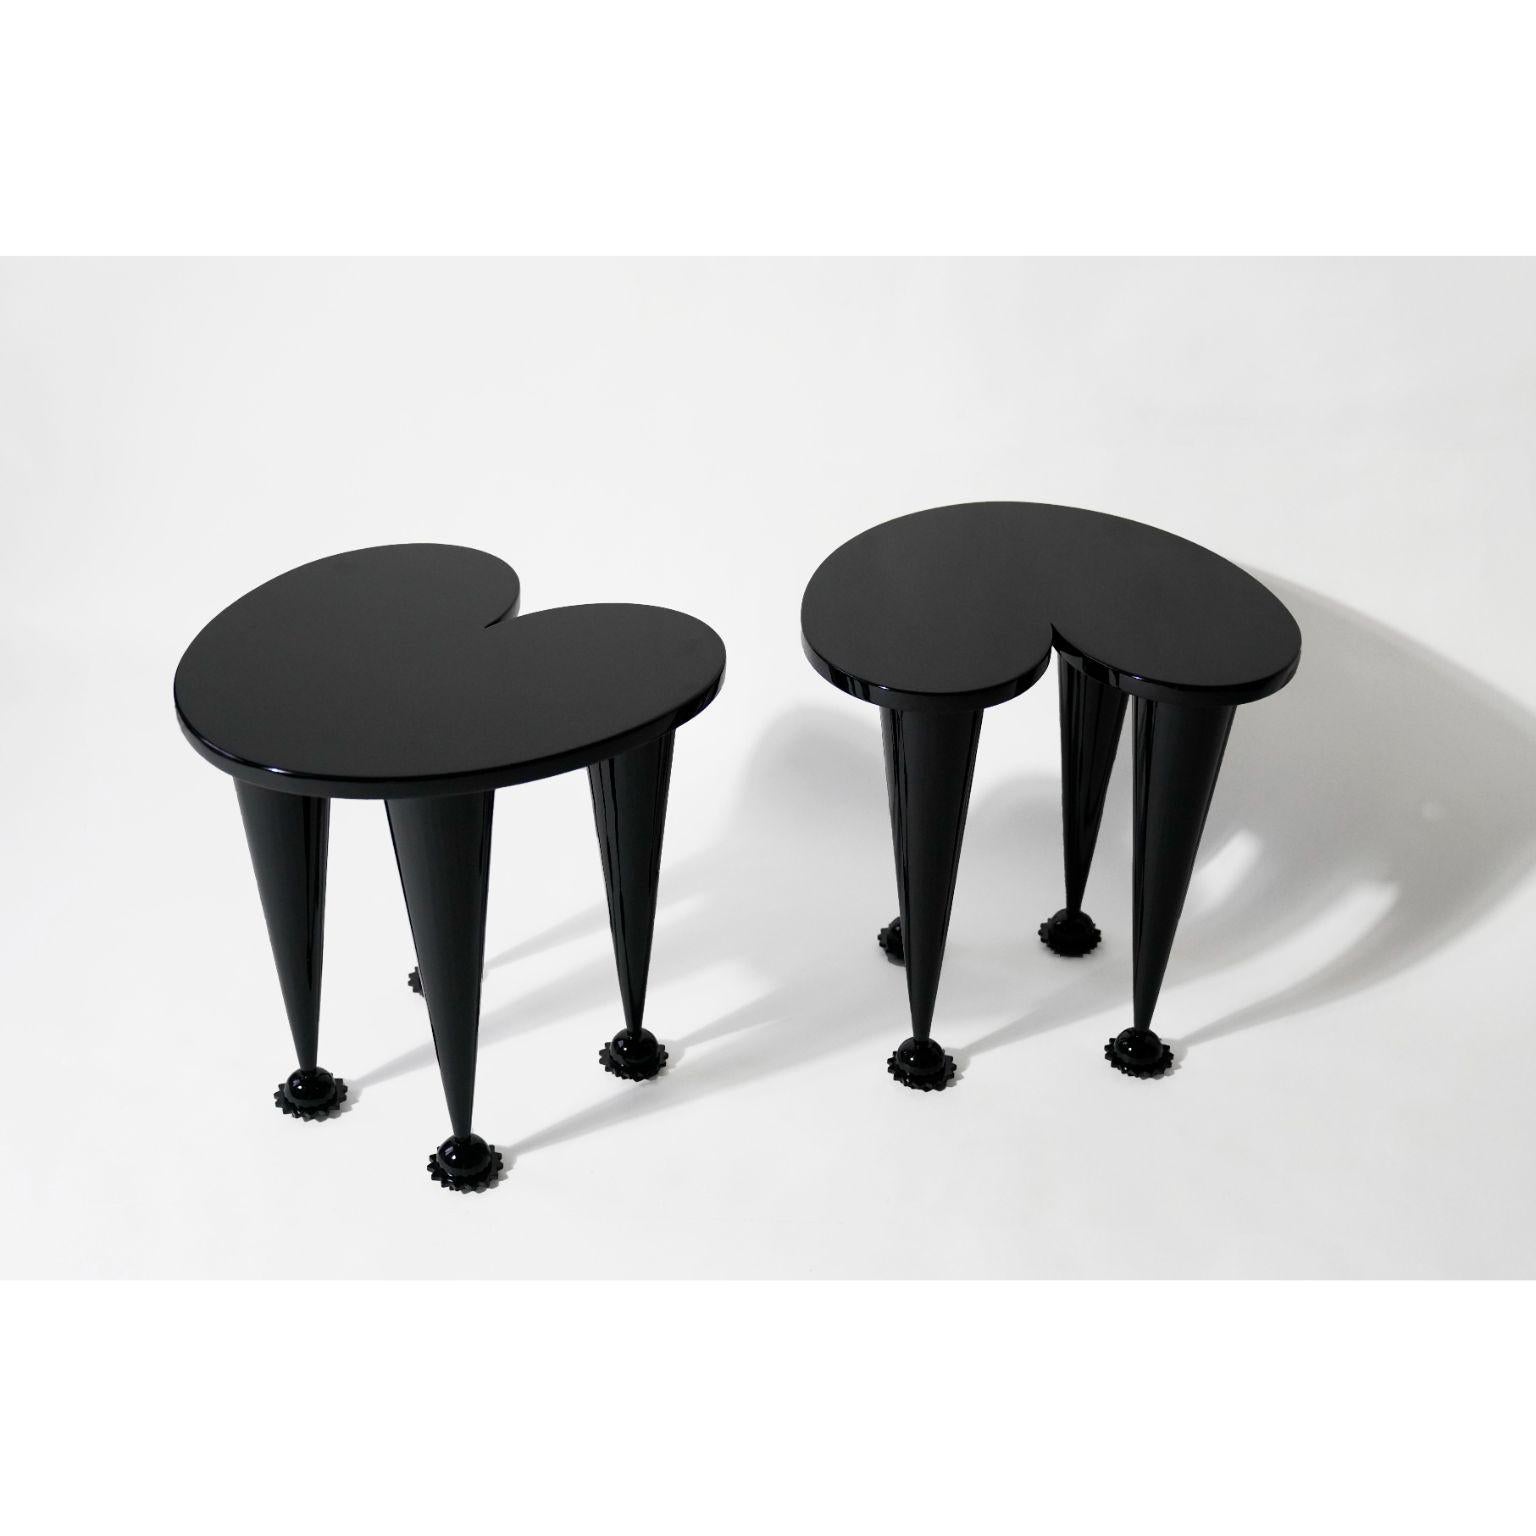 Set of 2 burning memories all black stools by The Shaw
Dimensions: D46 x W 44 x H45 cm
Materials: Stainless Steel, Wood
Weight: 8 kg

BURNING MEMORIES is a stage play released by THESHAW2021 in which red and black overlap. The side stool is